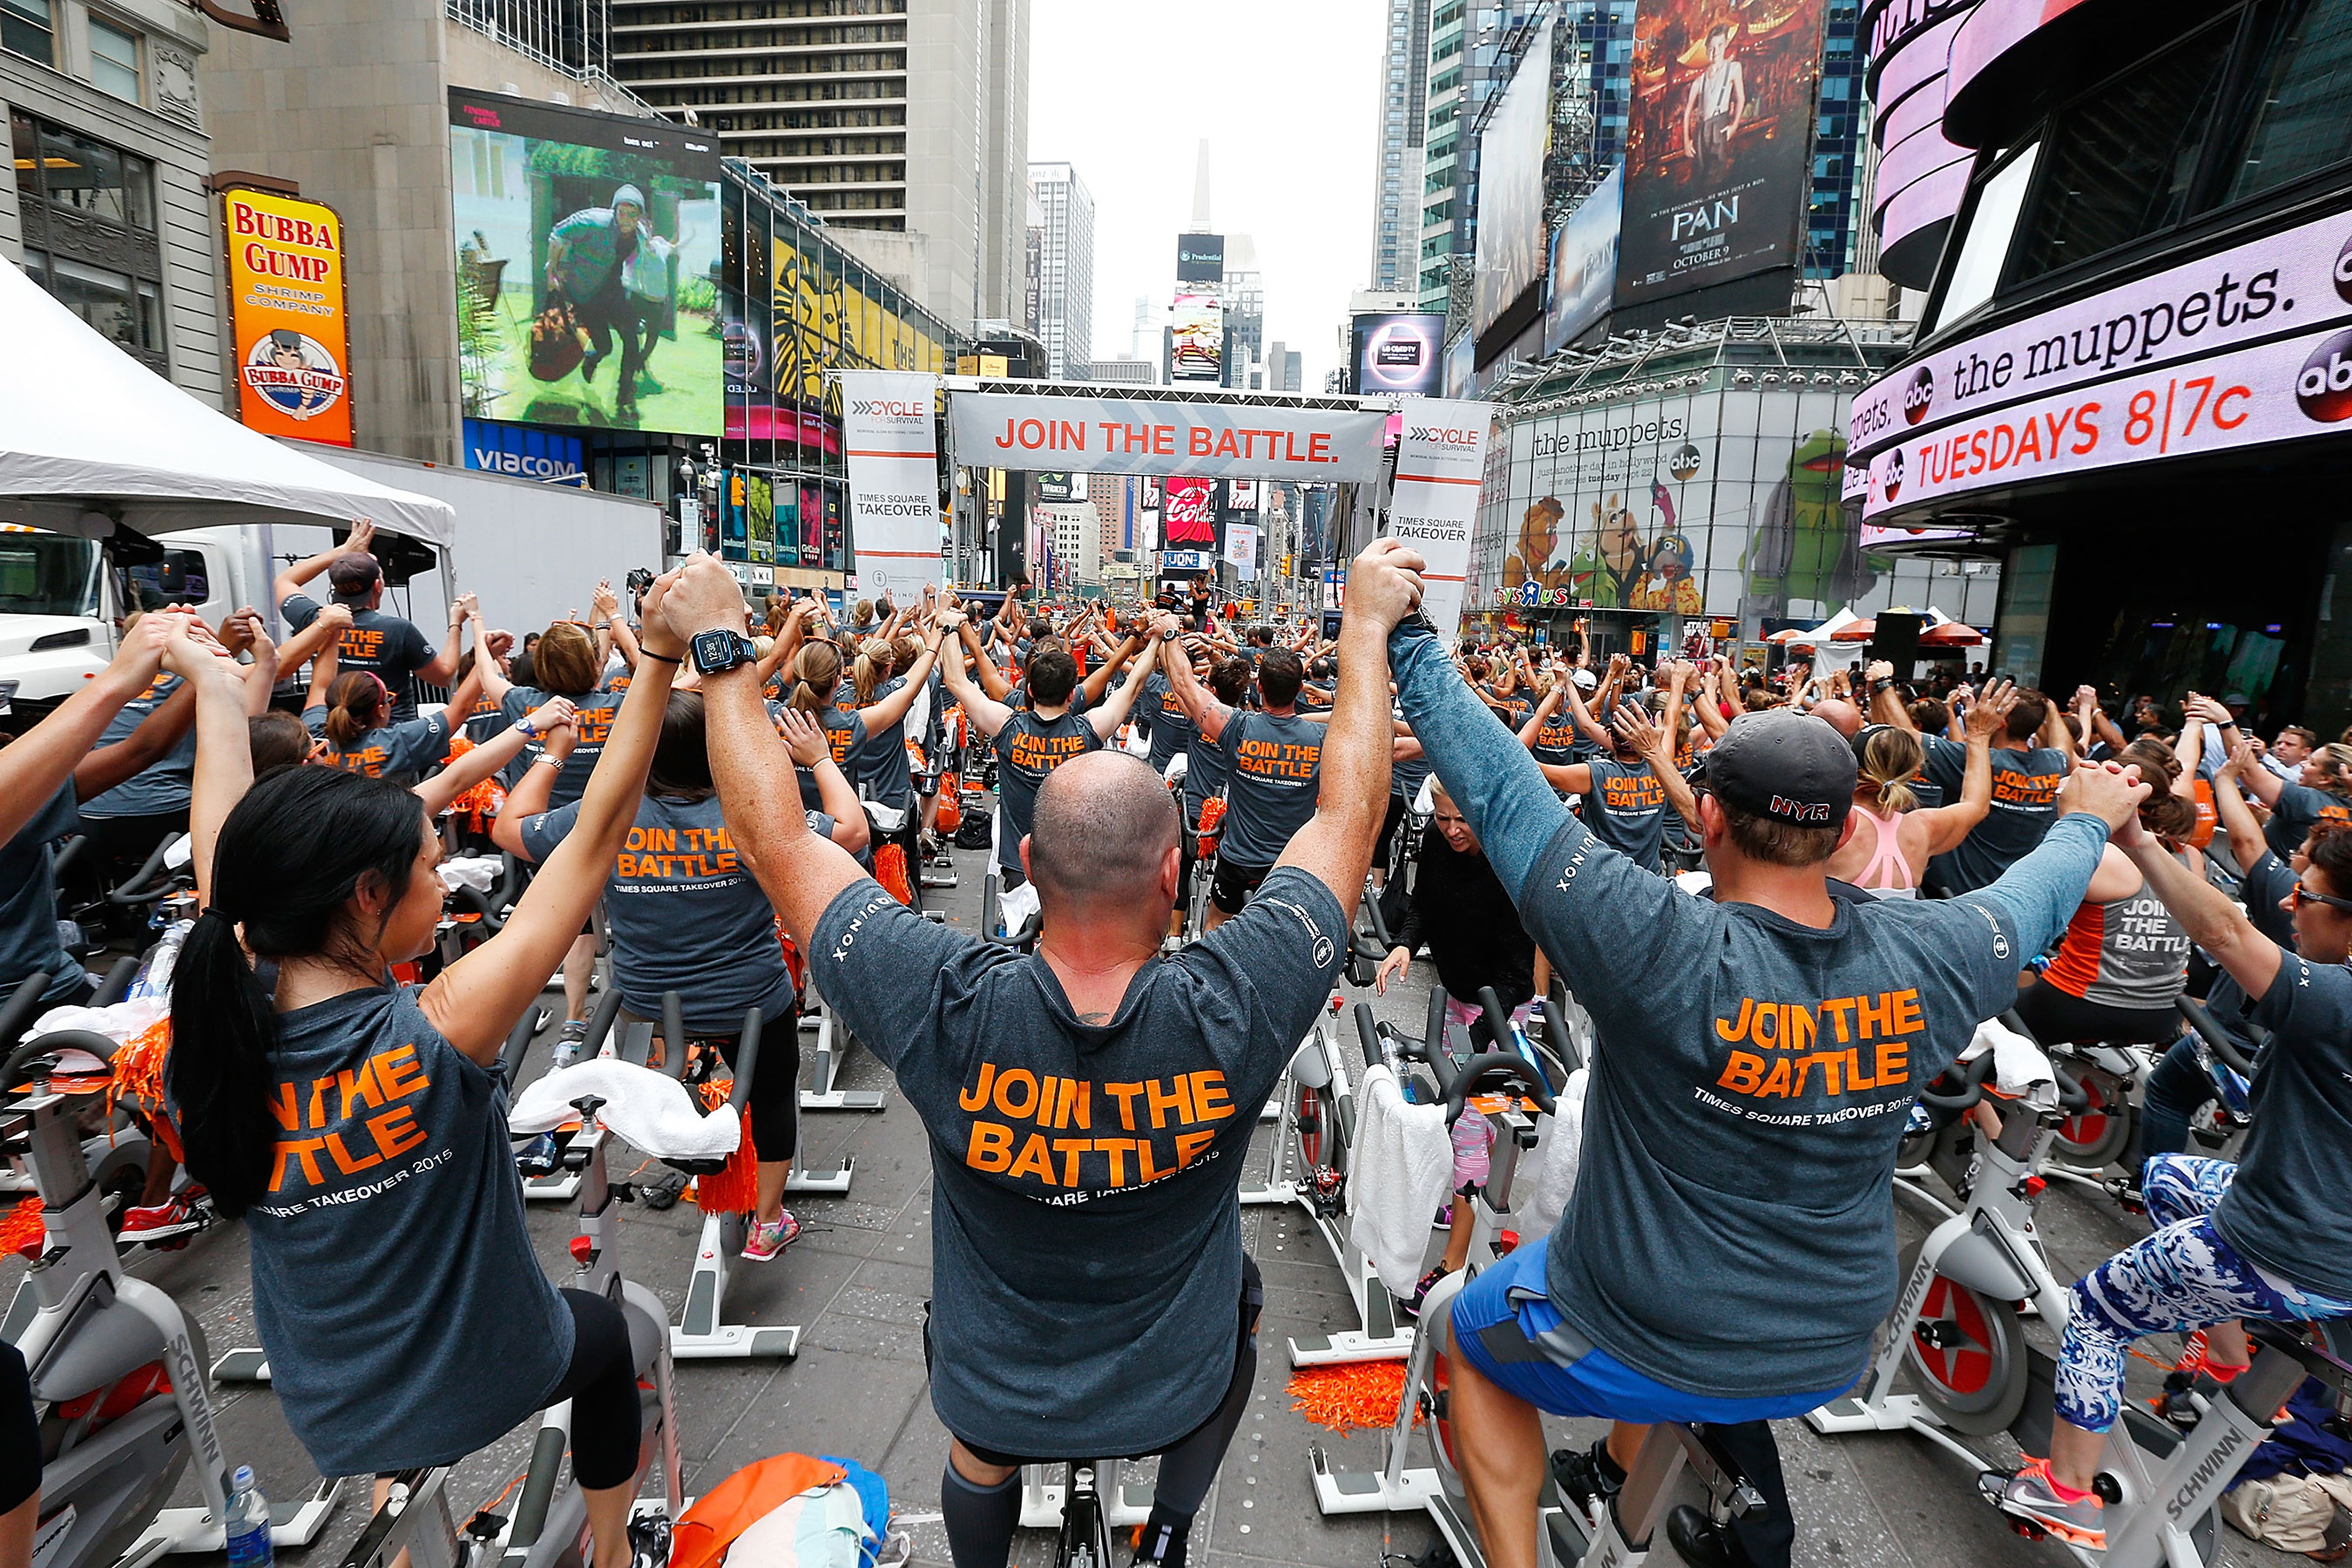 CYCLE FOR SURVIVAL LAUNCHES 2016 EVENT REGISTRATION WITH A SEA OF 